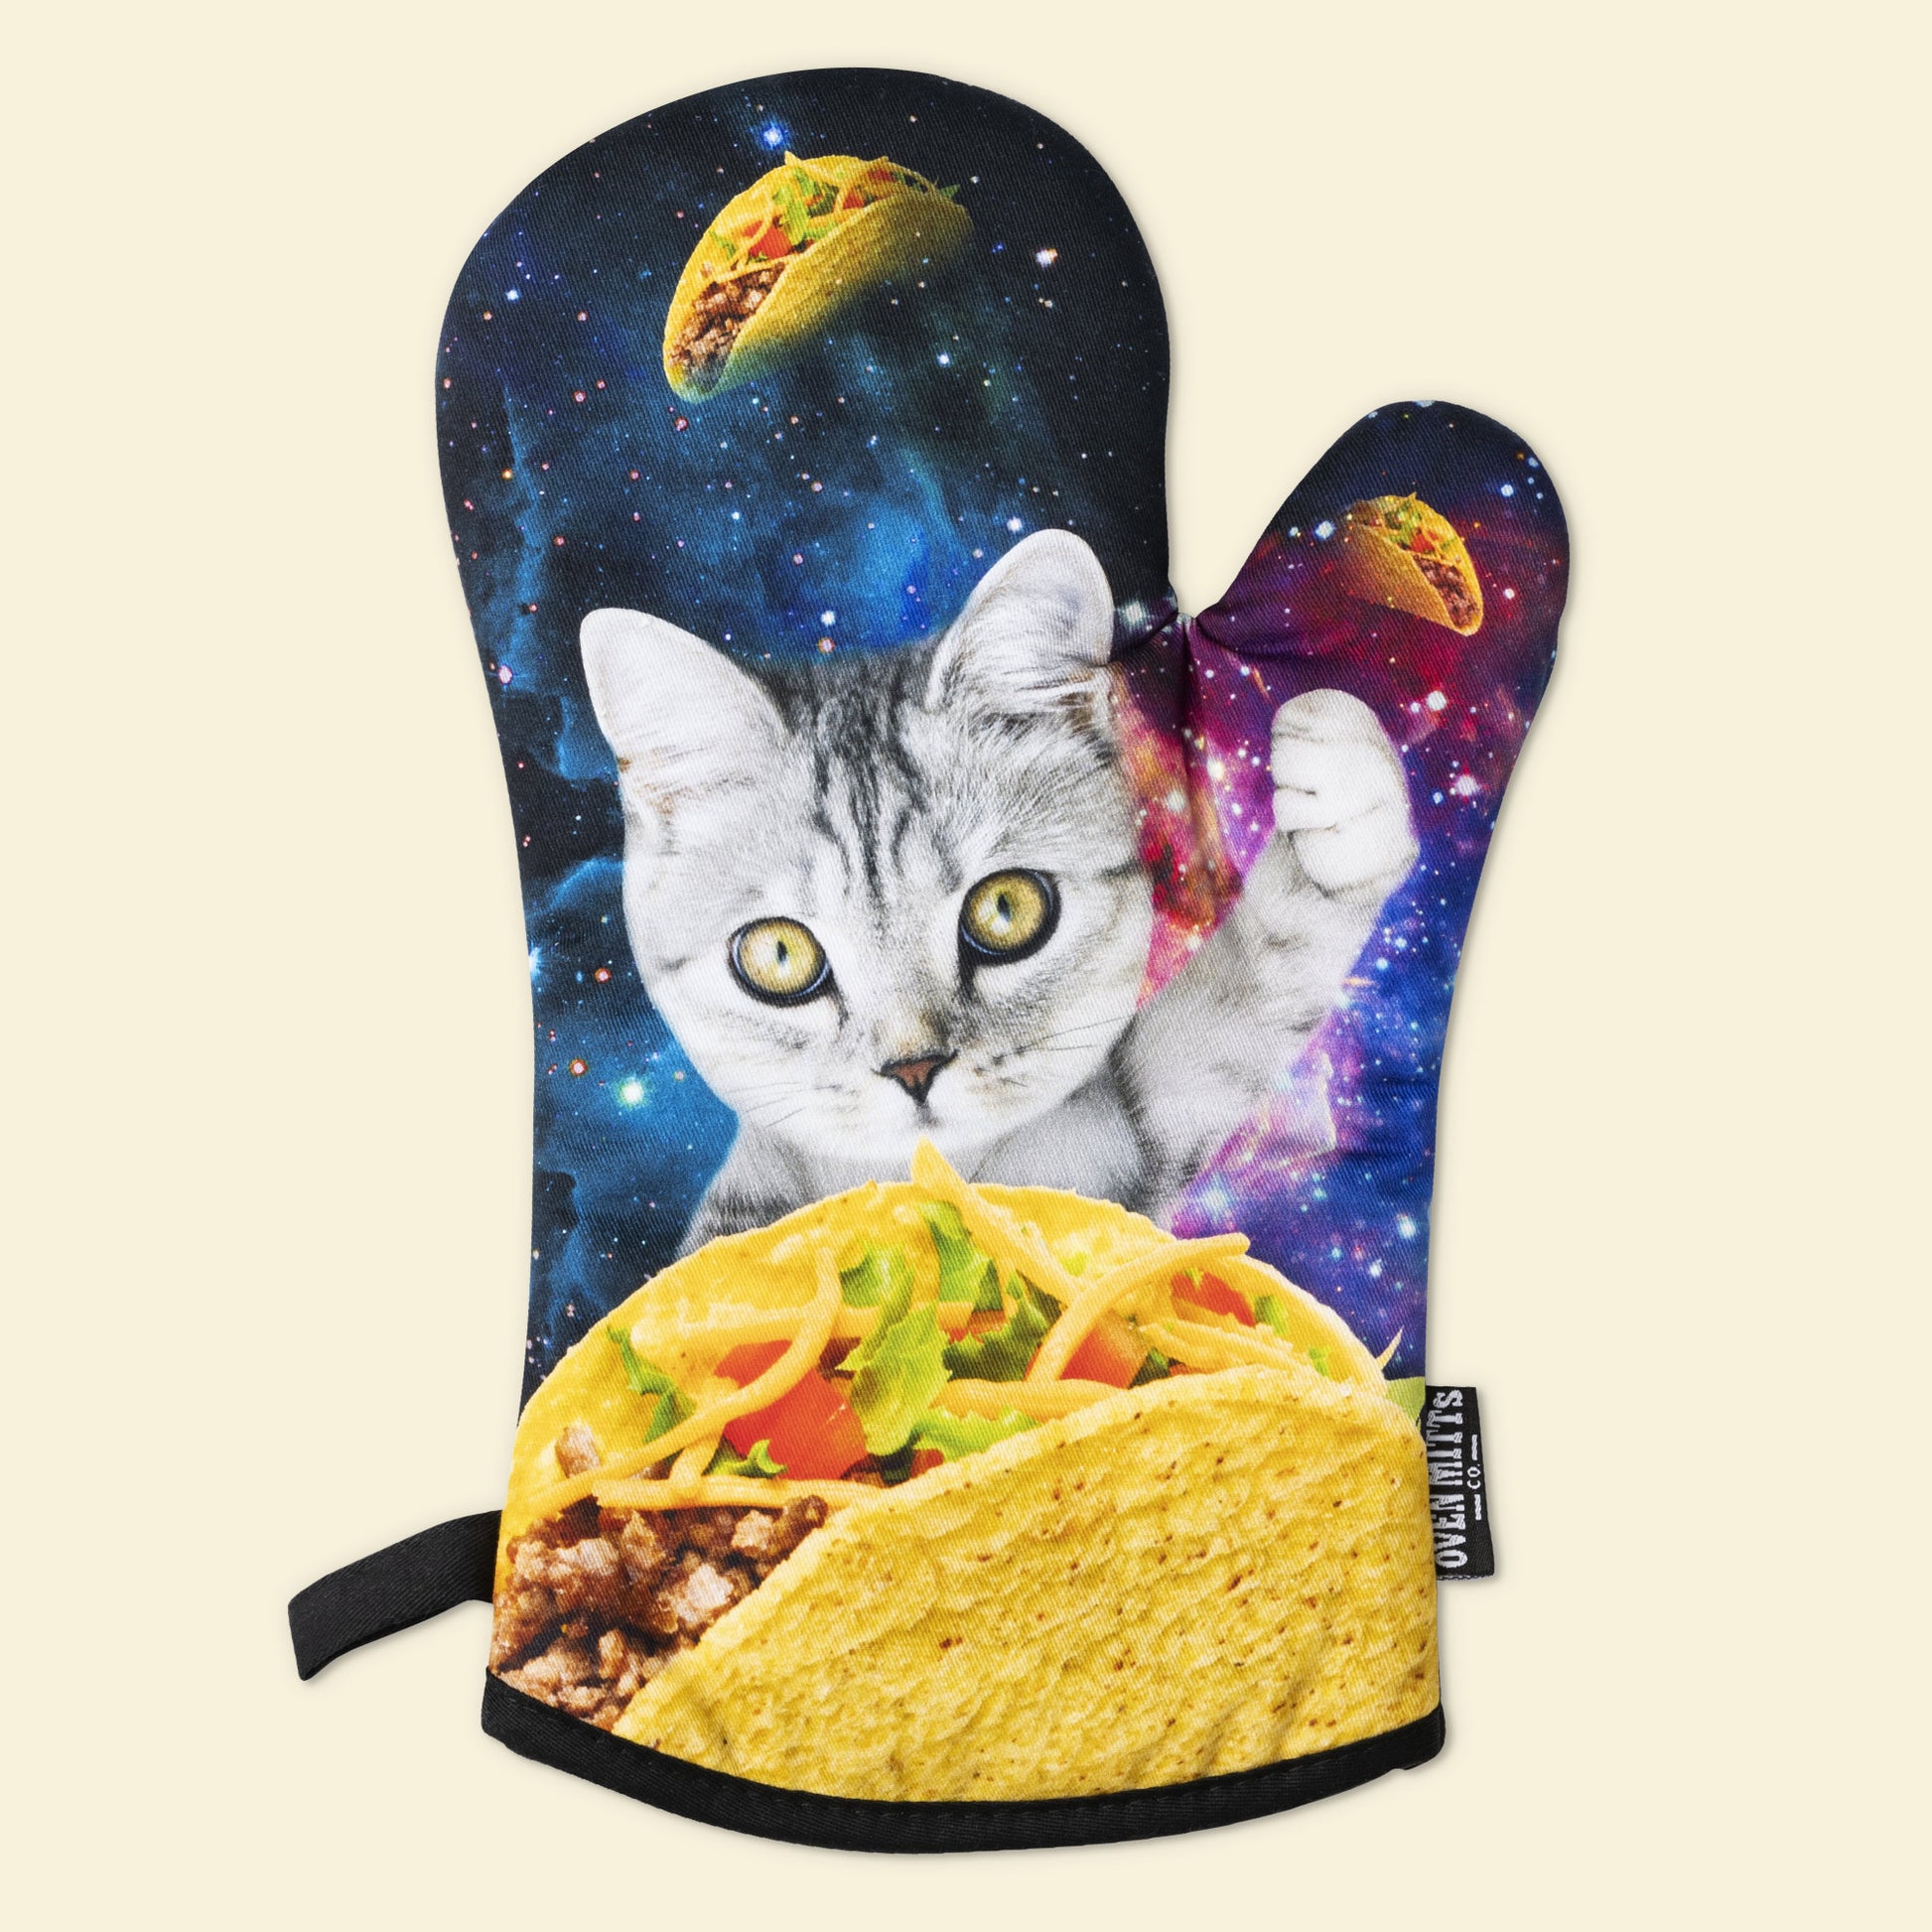 Black Cat Oven Mitt, Life Is What You Bake It